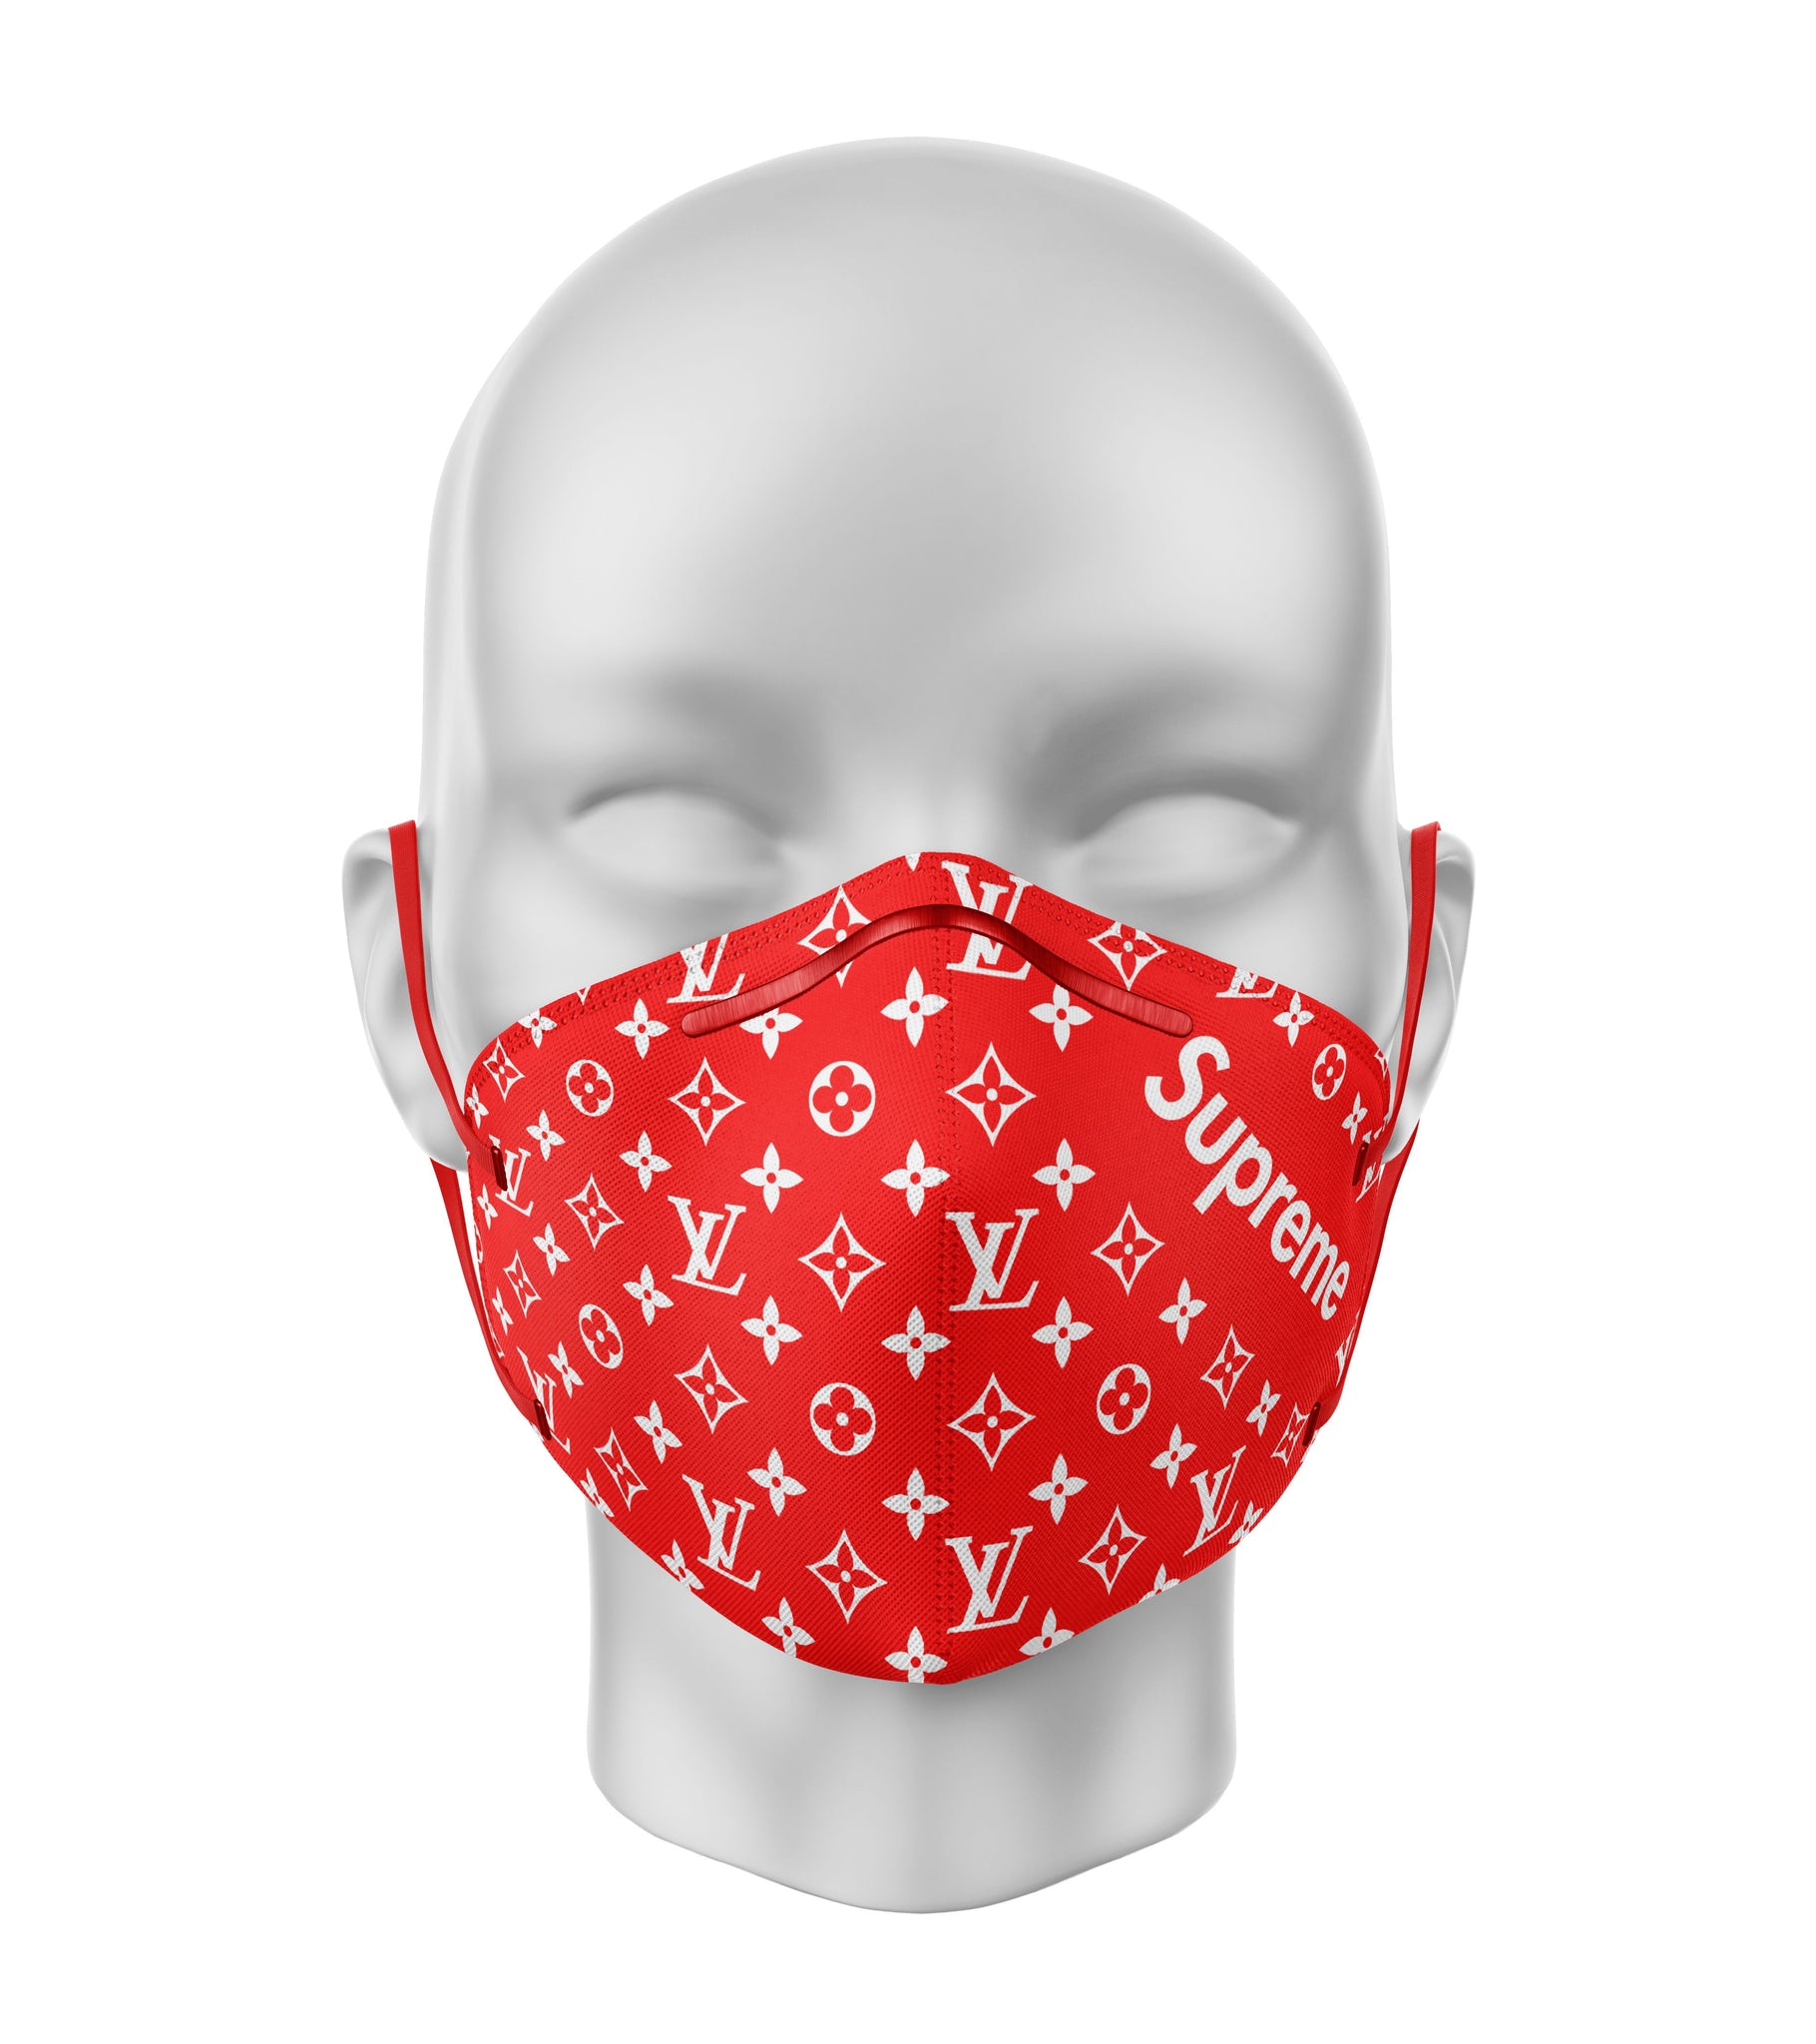 details for store reputable site lv face mask - wcy.wat.edu.pl